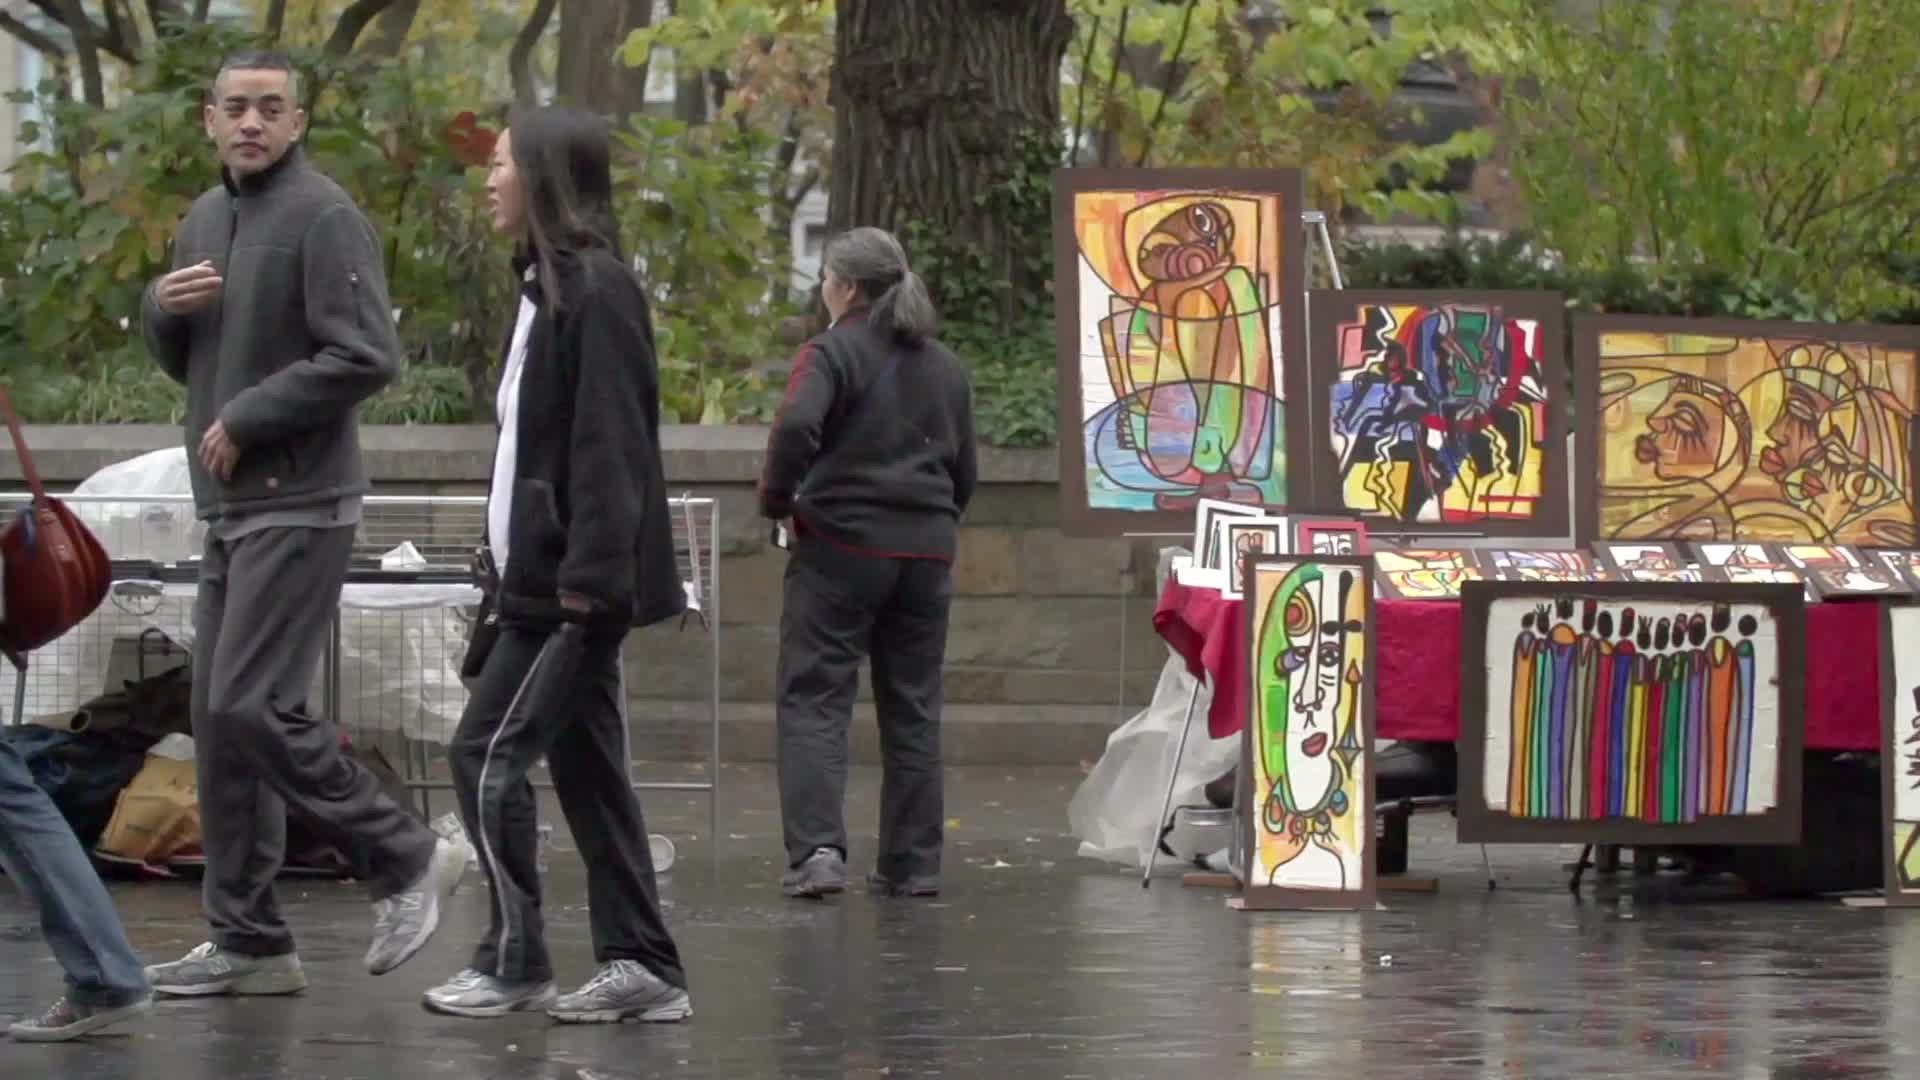 art on display at Union Square Park on street on wet fall day in NYC